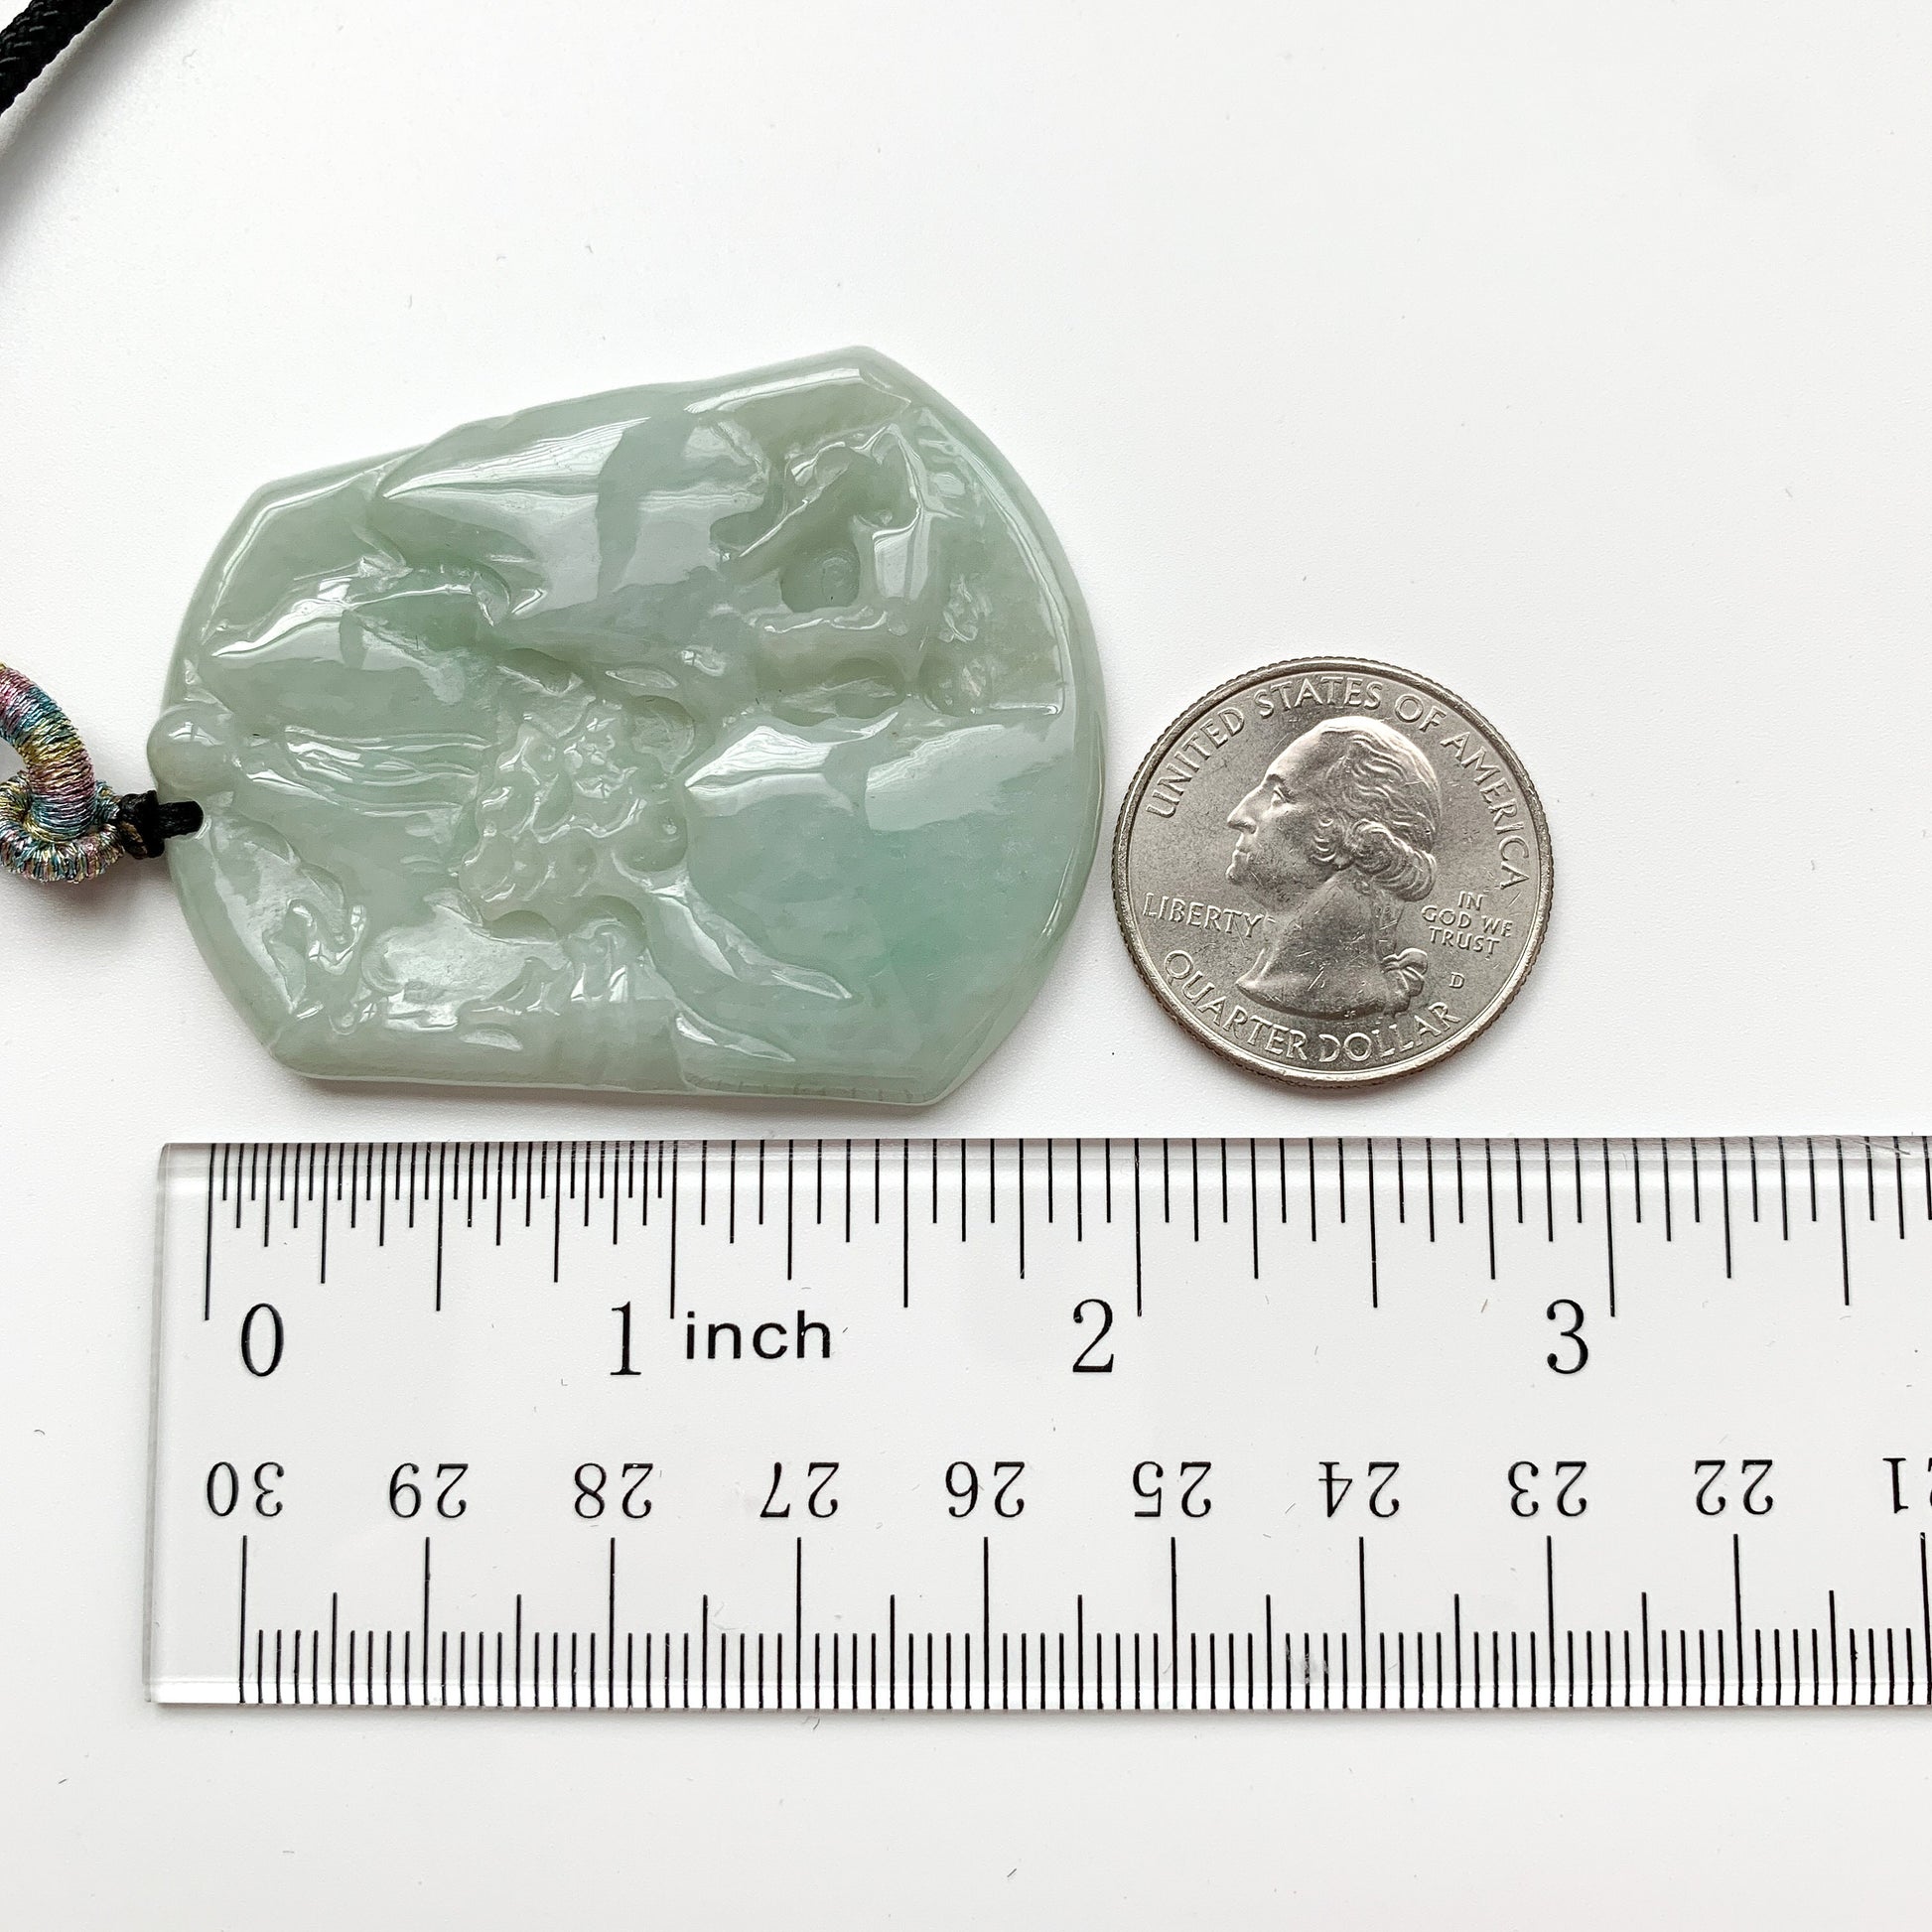 Jadeite Jade Landscape Mountain Forest River Scenery Hand Carved Pendant Necklace, YJ-0321-0318729 - AriaDesignCollection